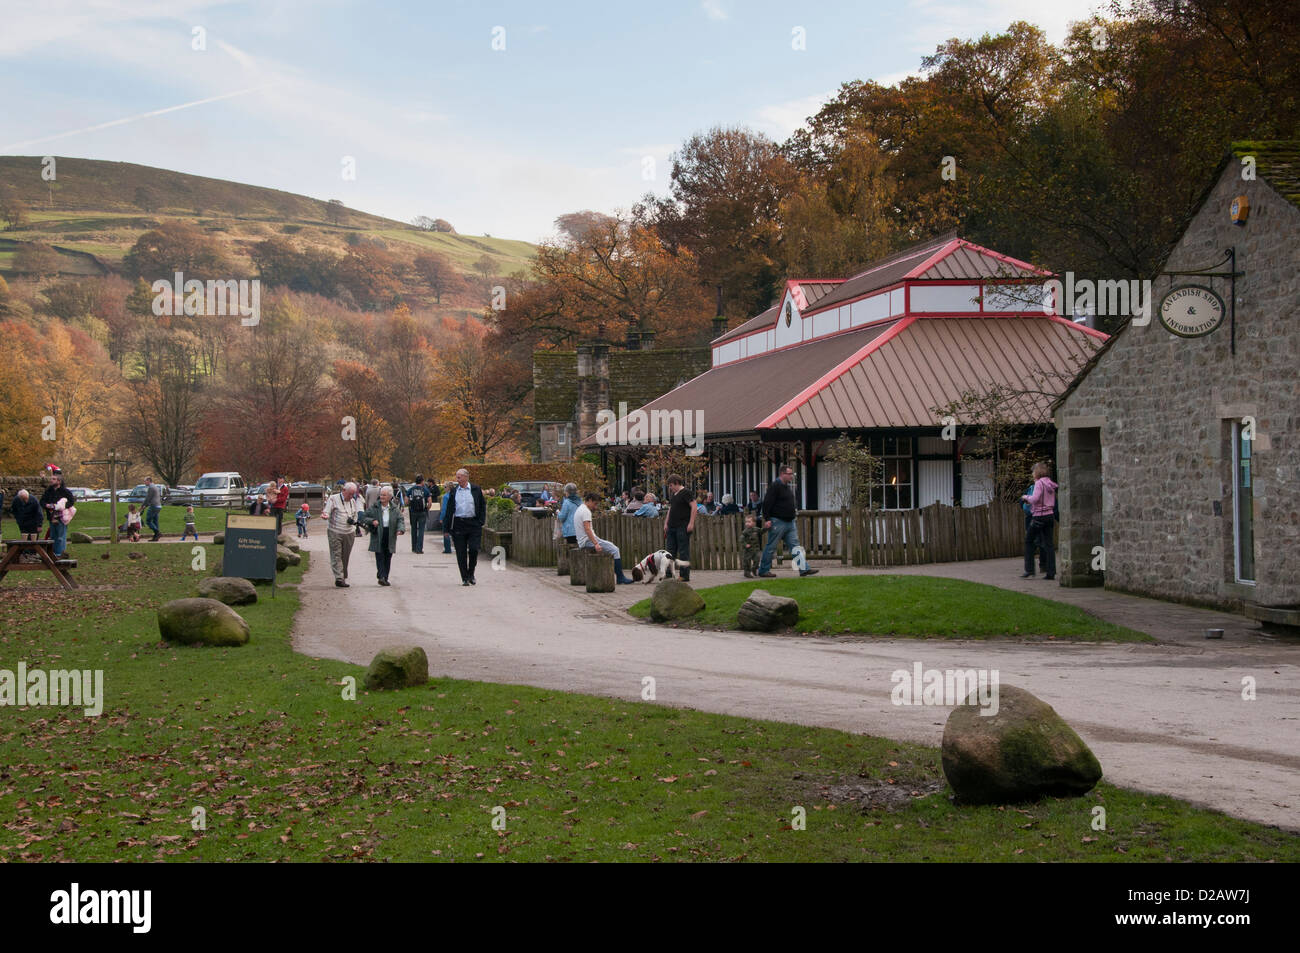 People of all ages (visitors) enjoying day out by scenic countryside cafe (Cavendish Pavilion) - Bolton Abbey Estate, Yorkshire Dales, England, UK. Stock Photo